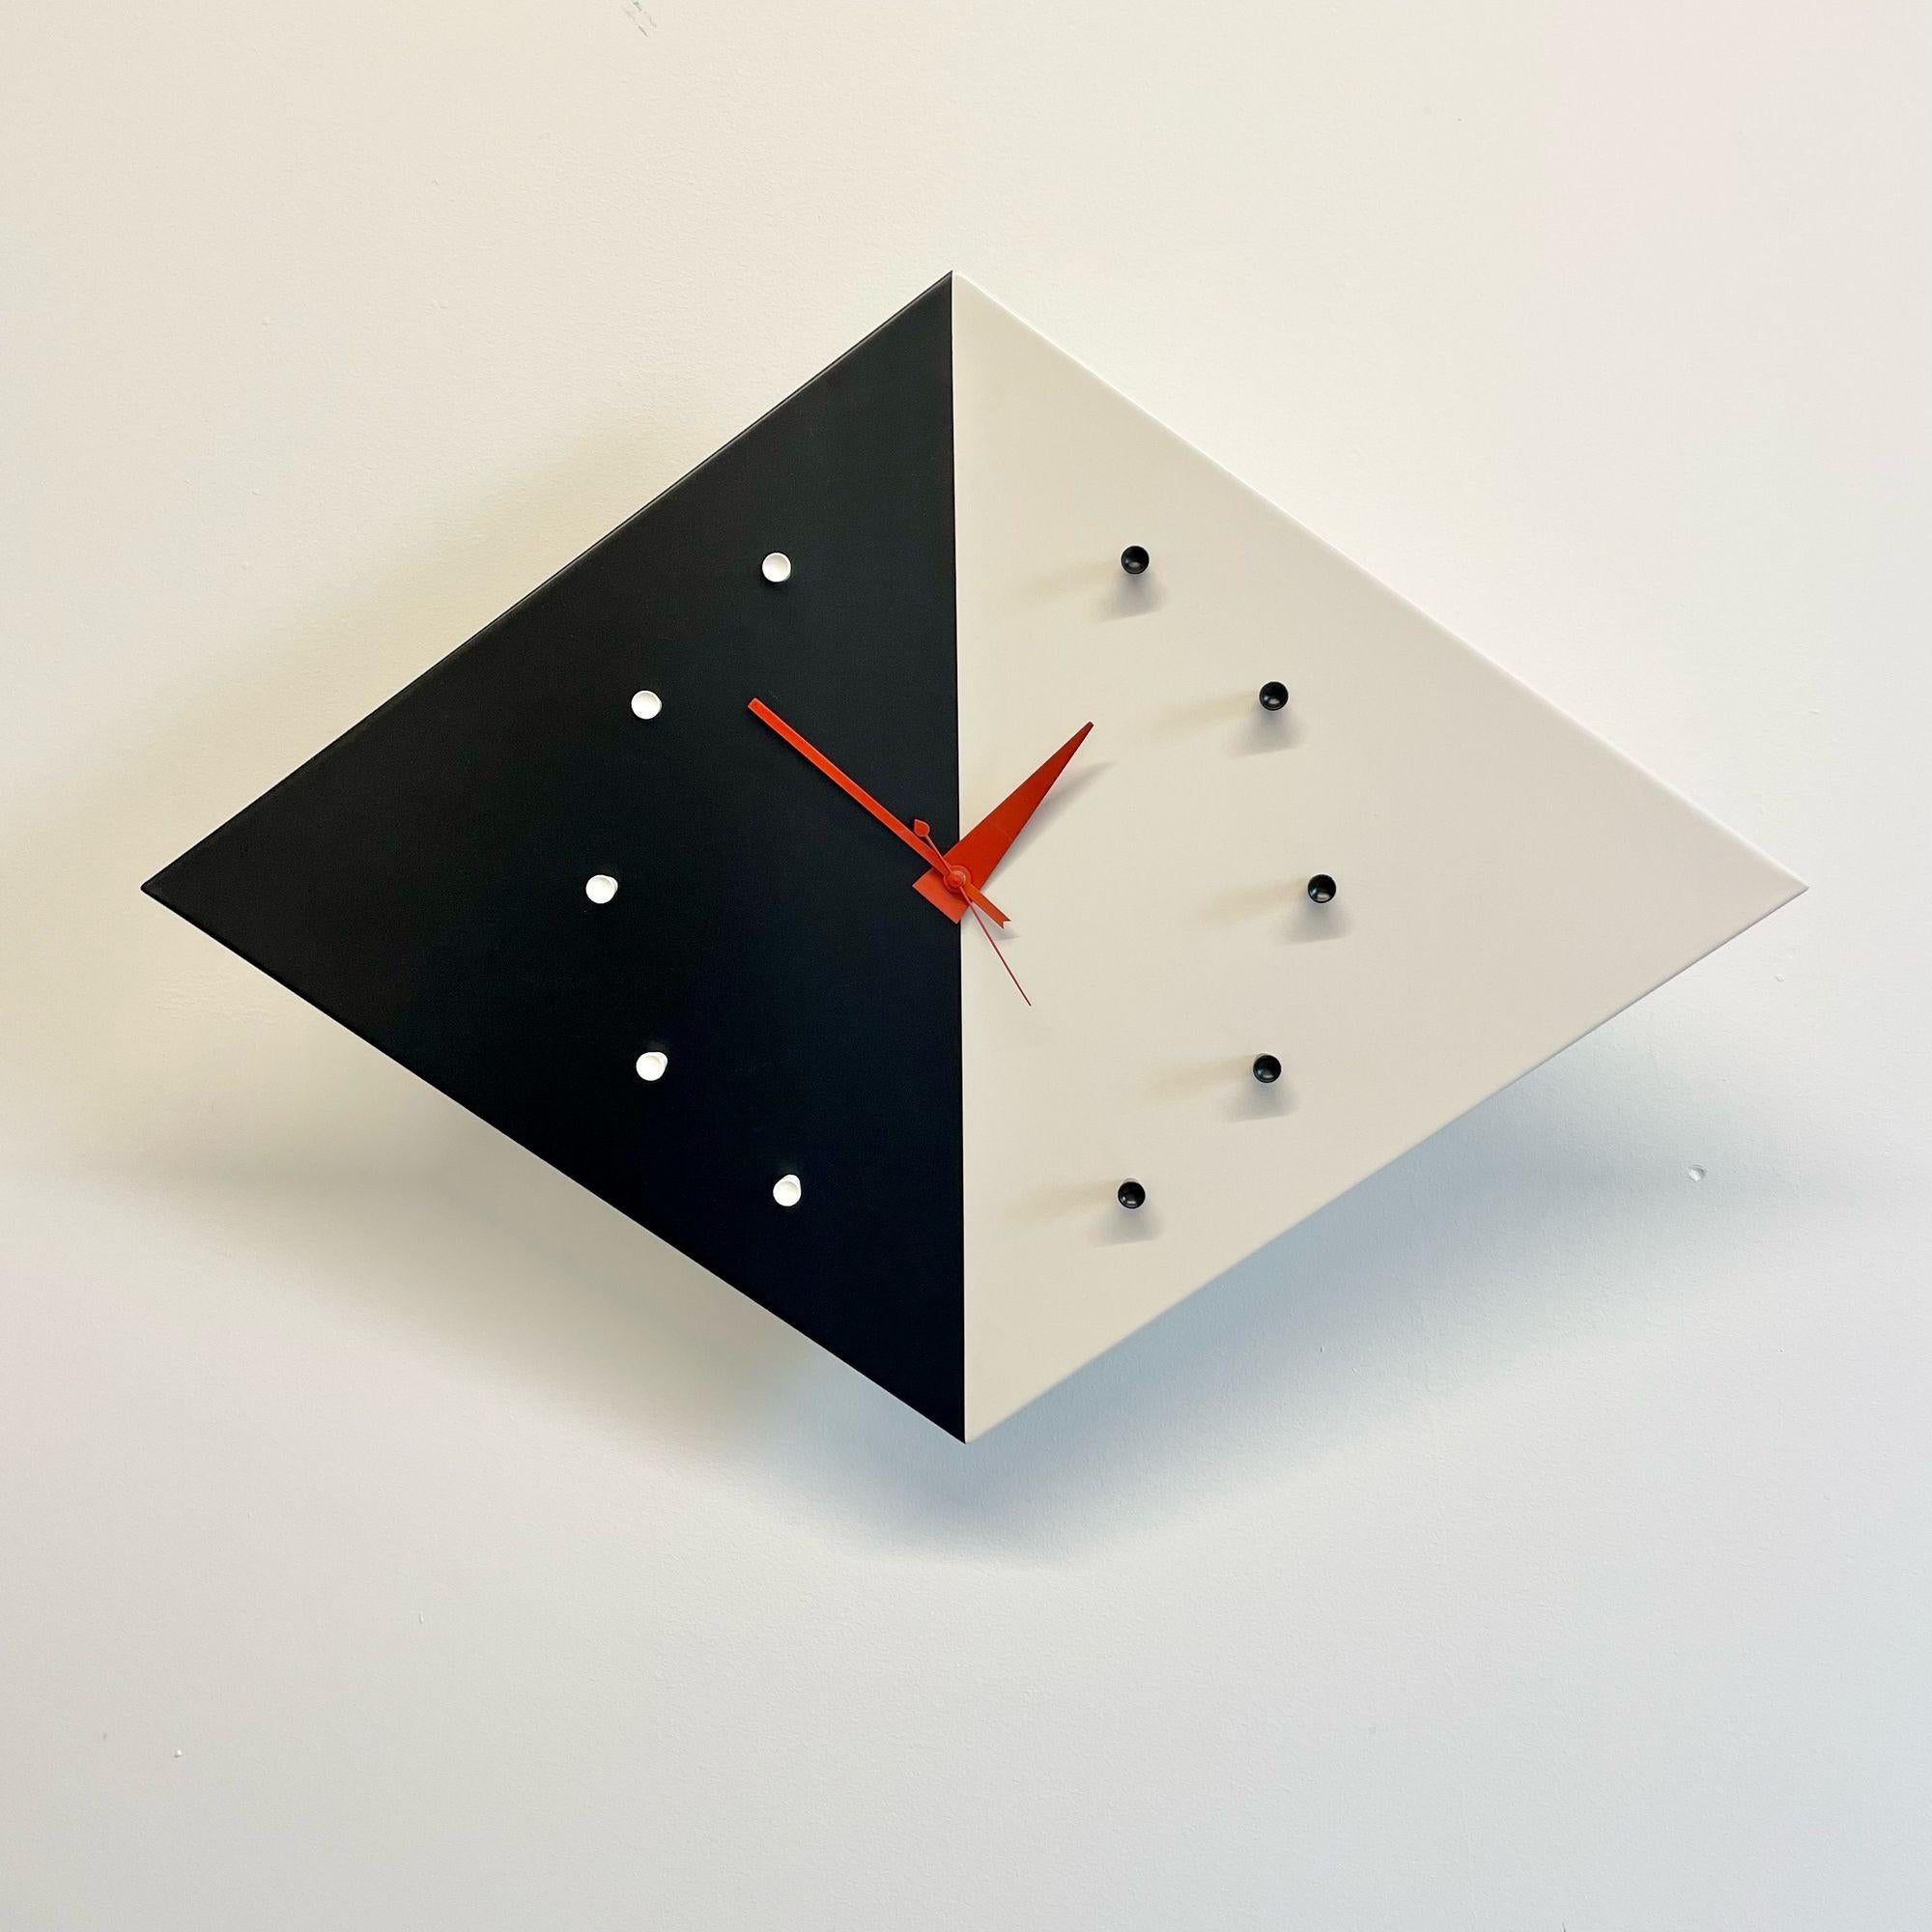 Mid-Century Modern kite wall clock by George Nelson, Howard Miller, Vitra Label
 
George Nelson (American, 1908-1986) Group of Table and Wall Clocks for Howard Miller, Vitra Design Museum, Poland/Germany, designed 1949-1954 Vitra Design Museum